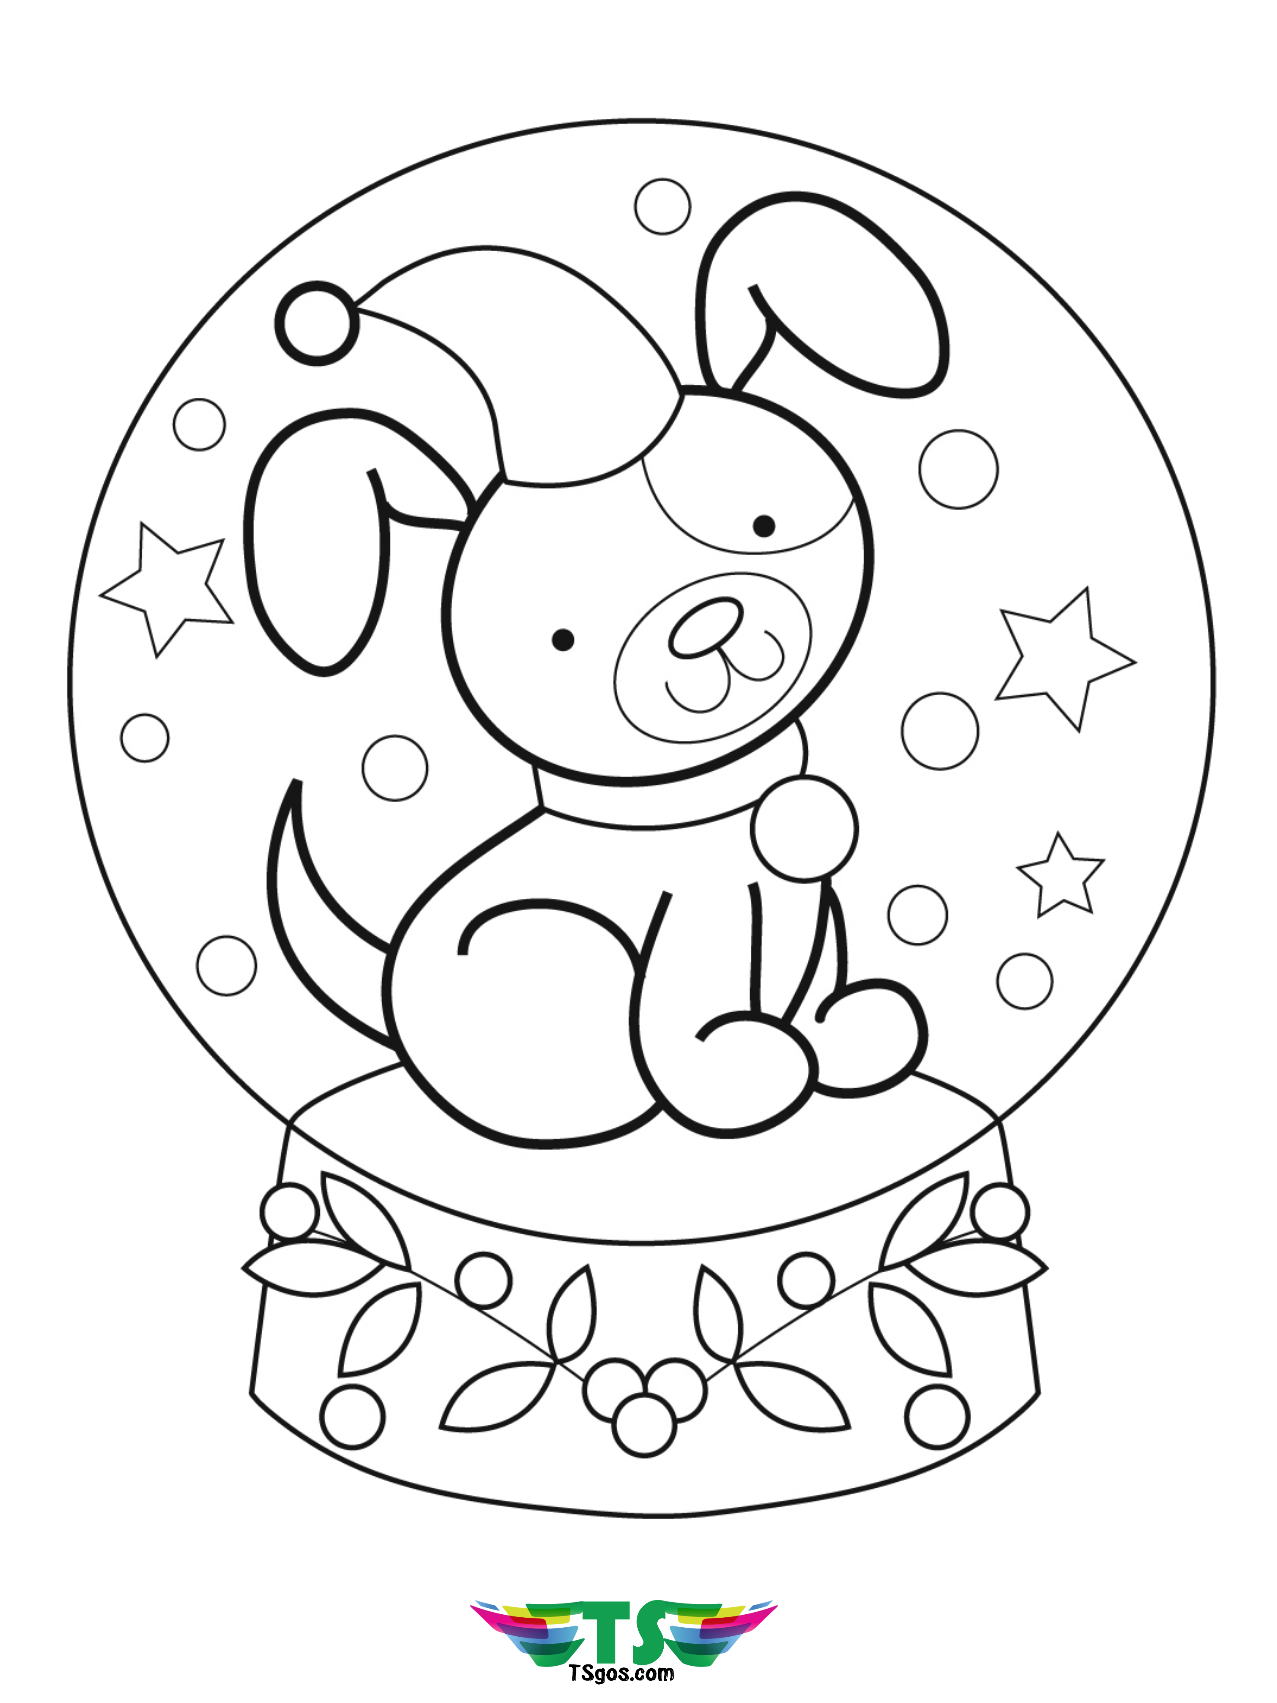 Free and easy dog coloring page for toddlers - TSgos.com